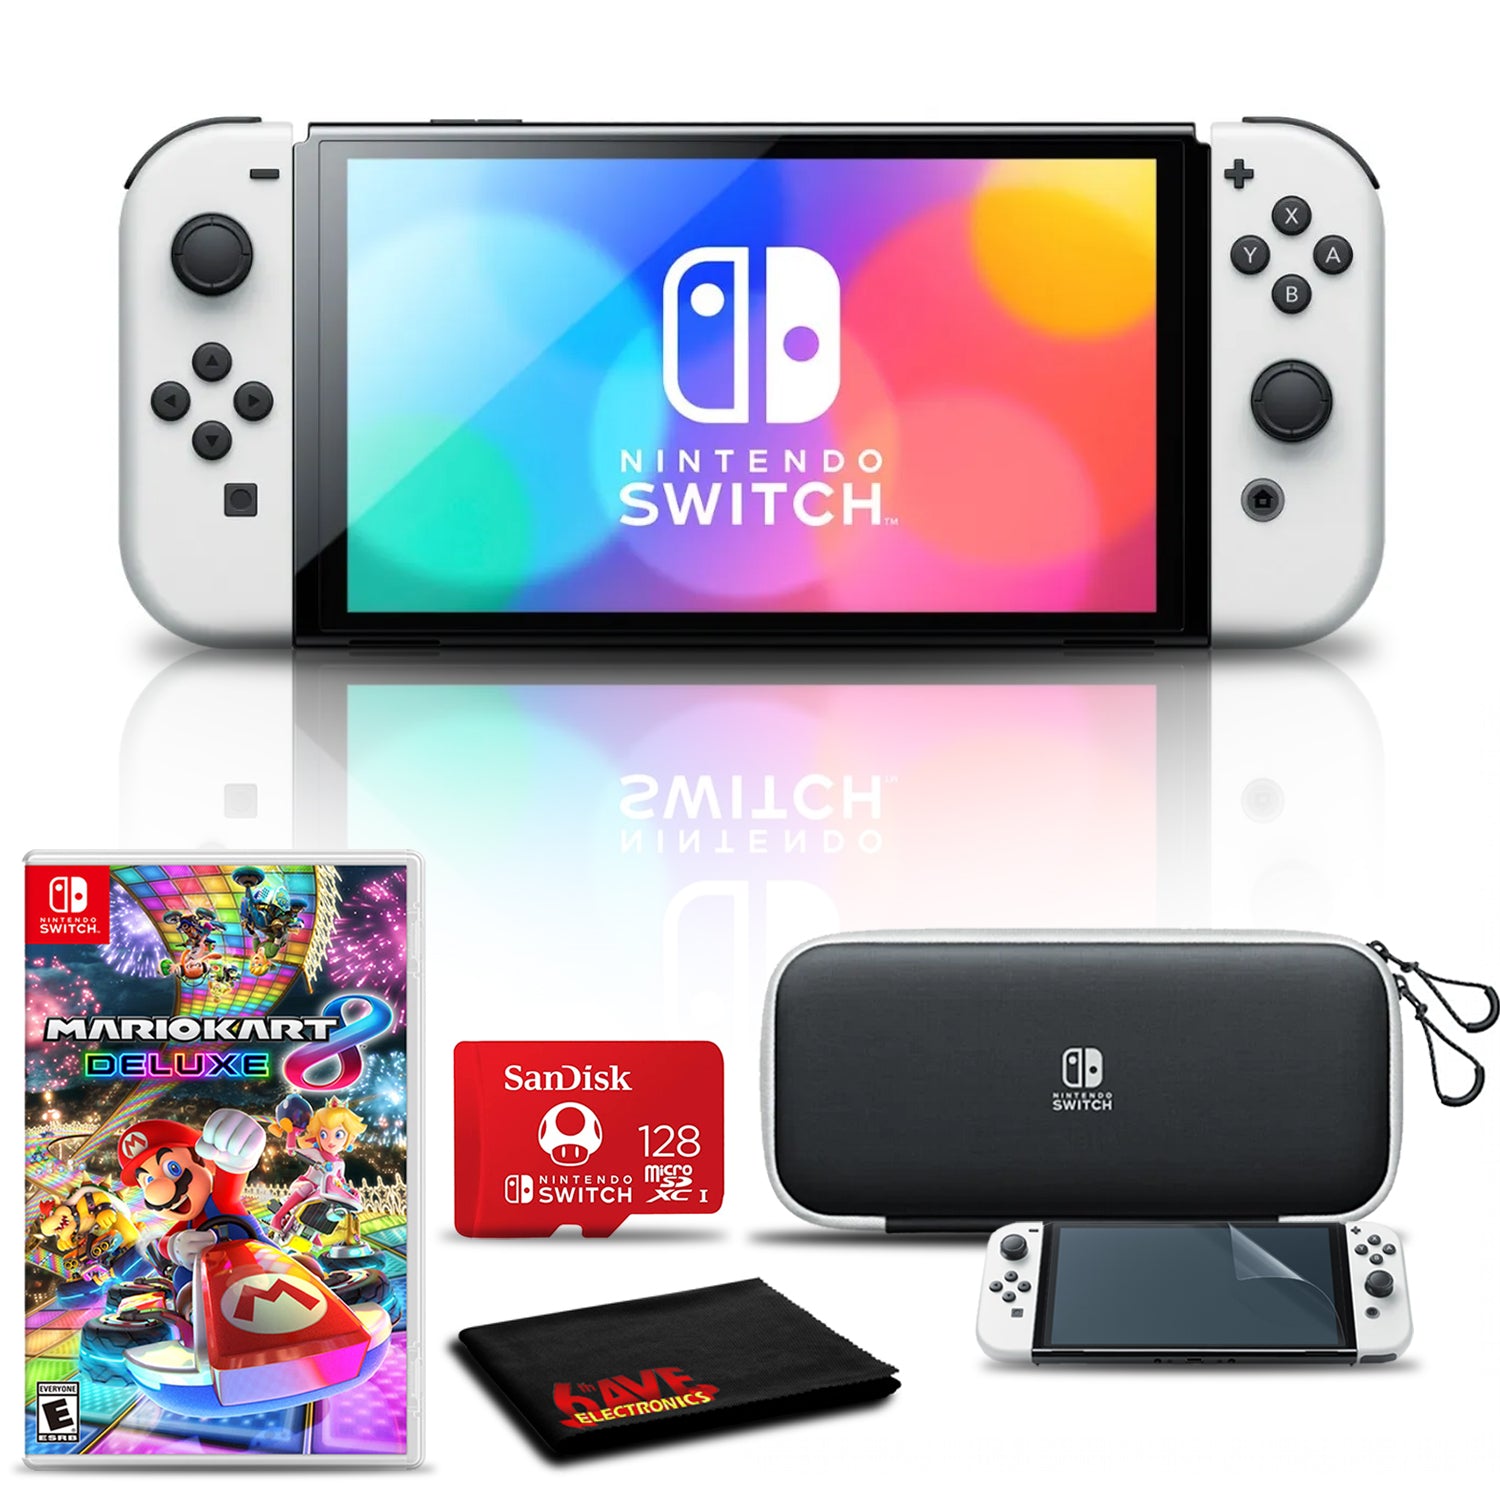 Nintendo Switch OLED White with Mario Kart 8 Deluxe, 128GB Card Bundle